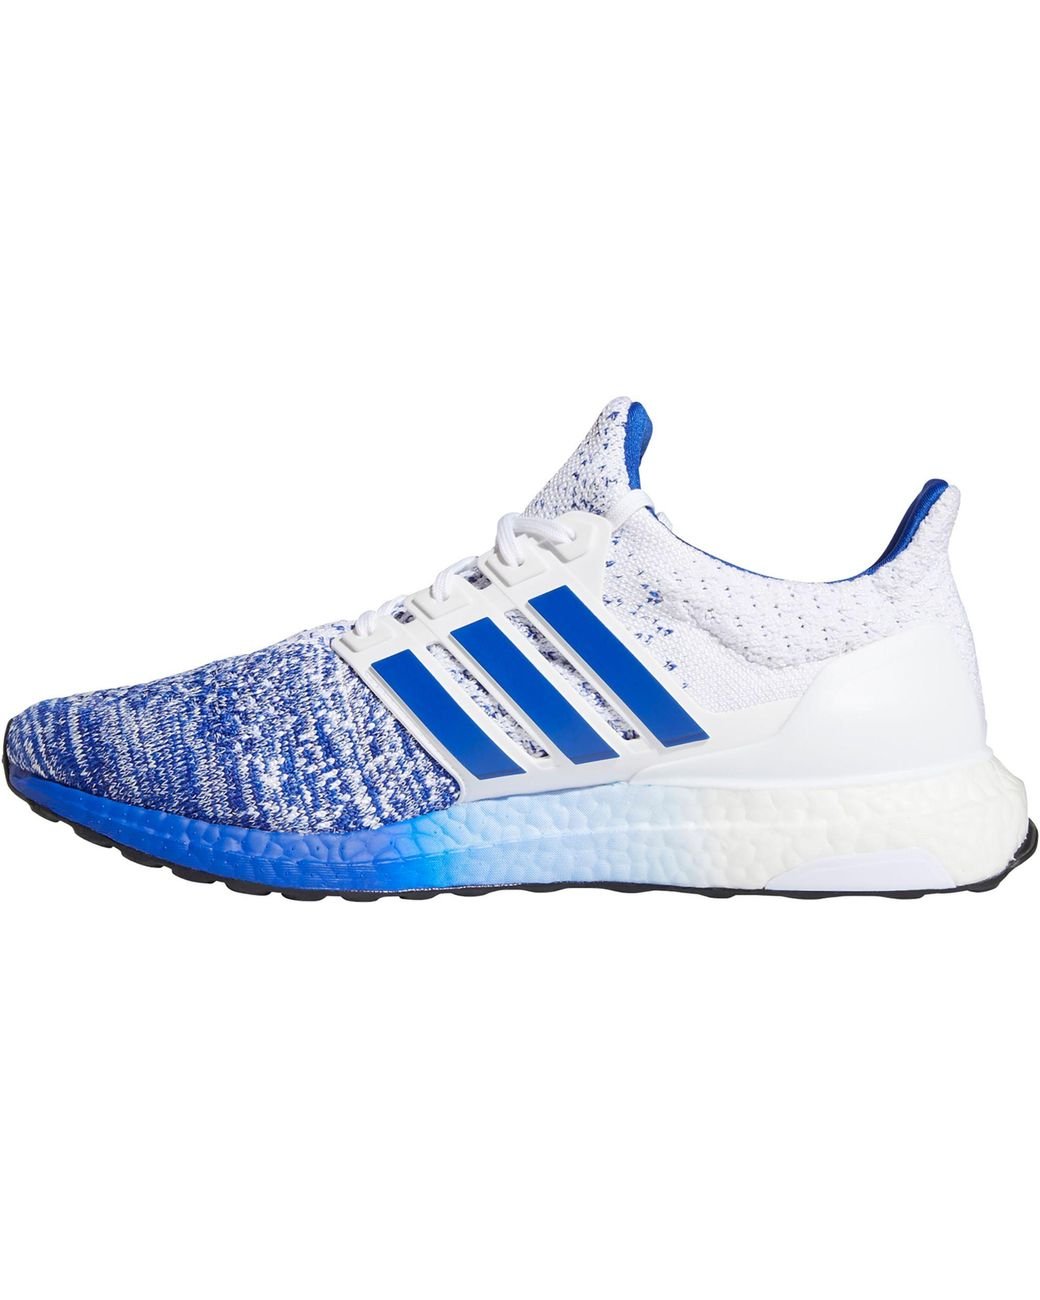 adidas Rubber Ultraboost 4.0 Dna Running Shoes in Blue Ombre (Blue) for Men  | Lyst